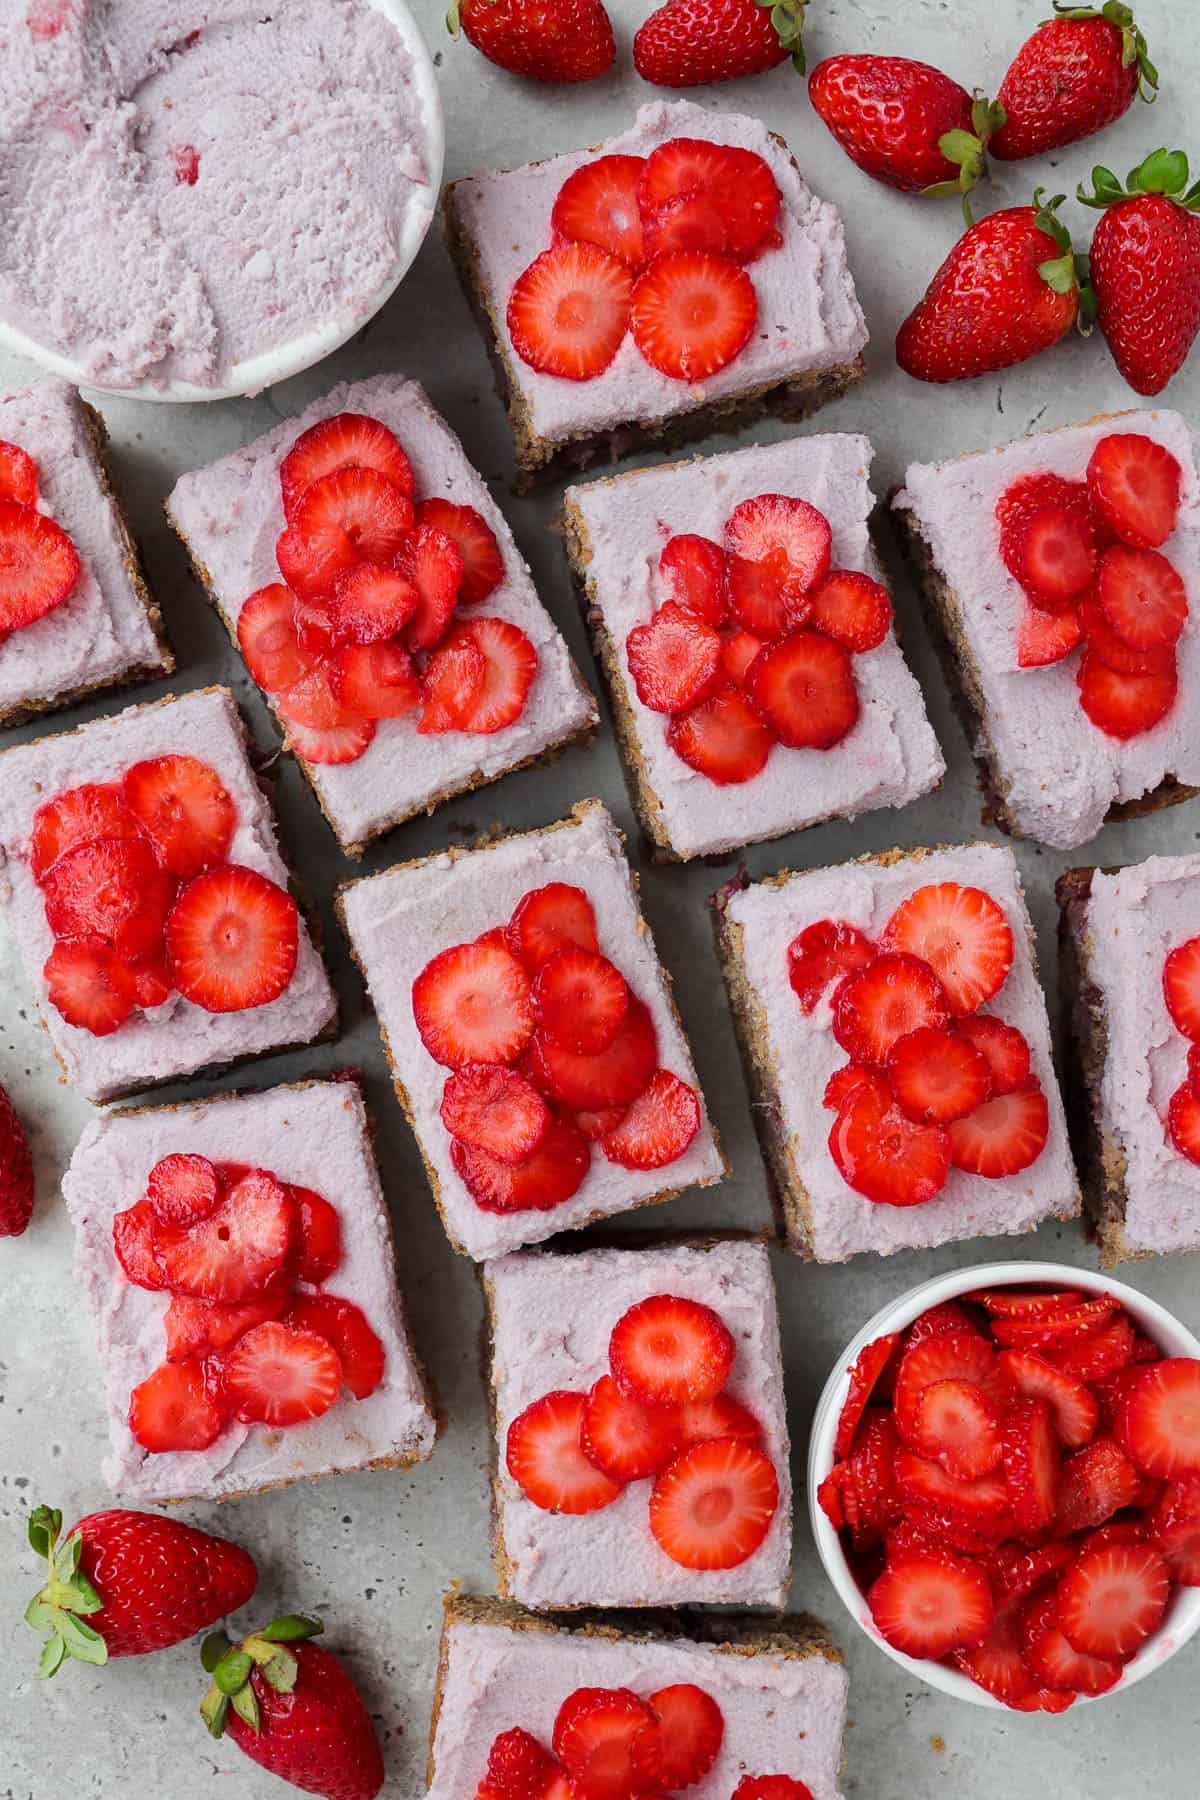 Frosted cake topped with sliced strawberries and cut up into small rectangle slices.